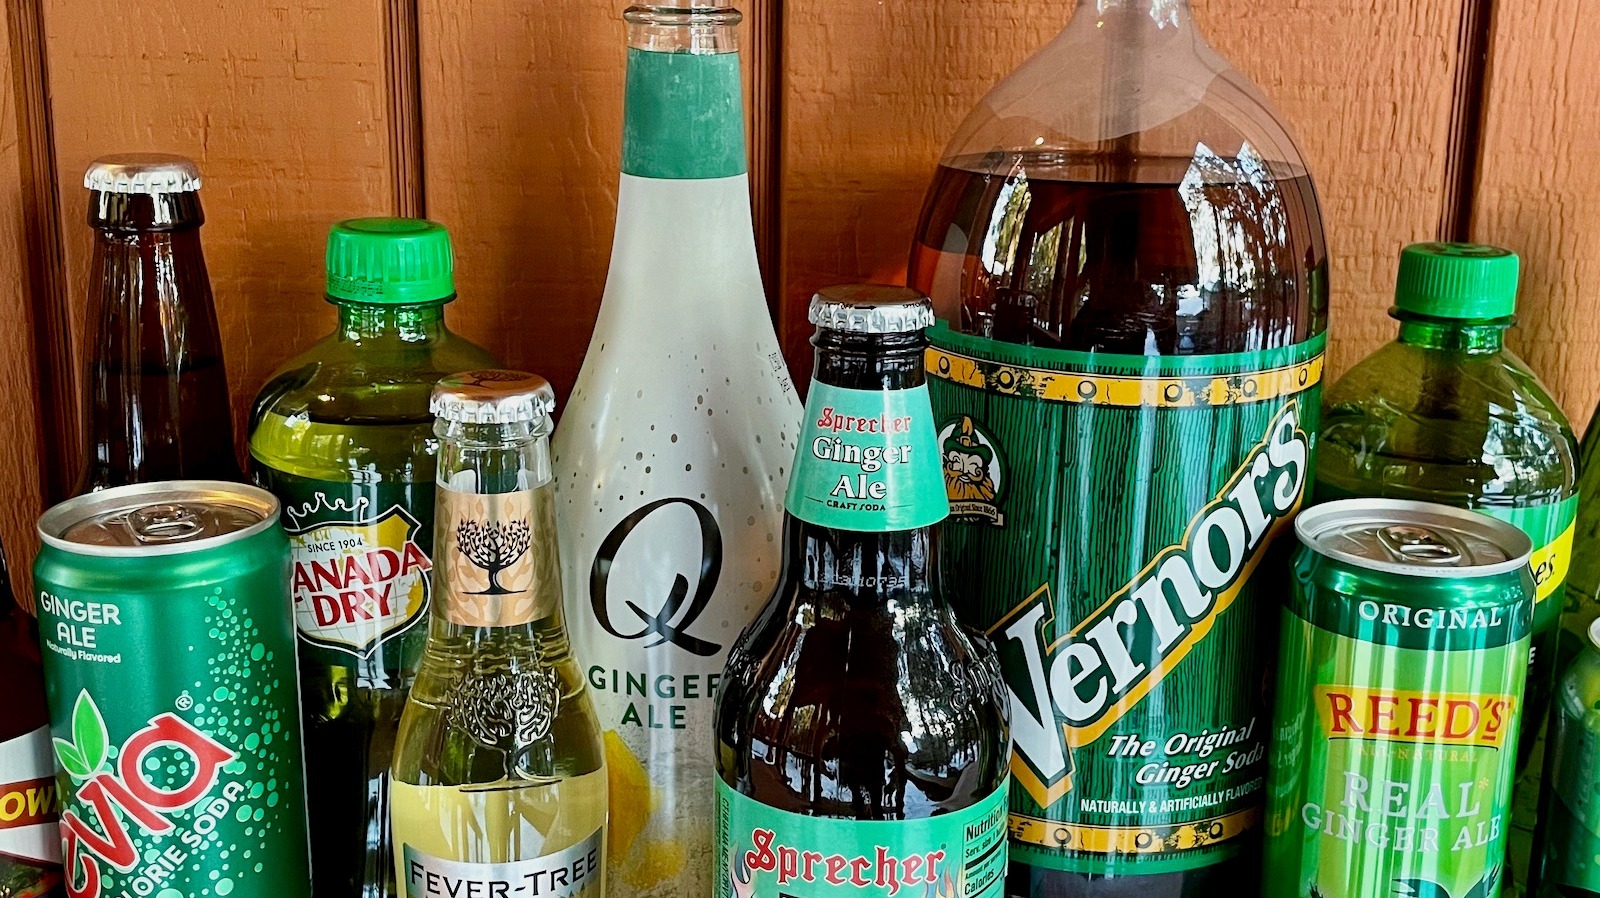 12 Ginger Ale Brands Ranked Worst To Best, 58% OFF